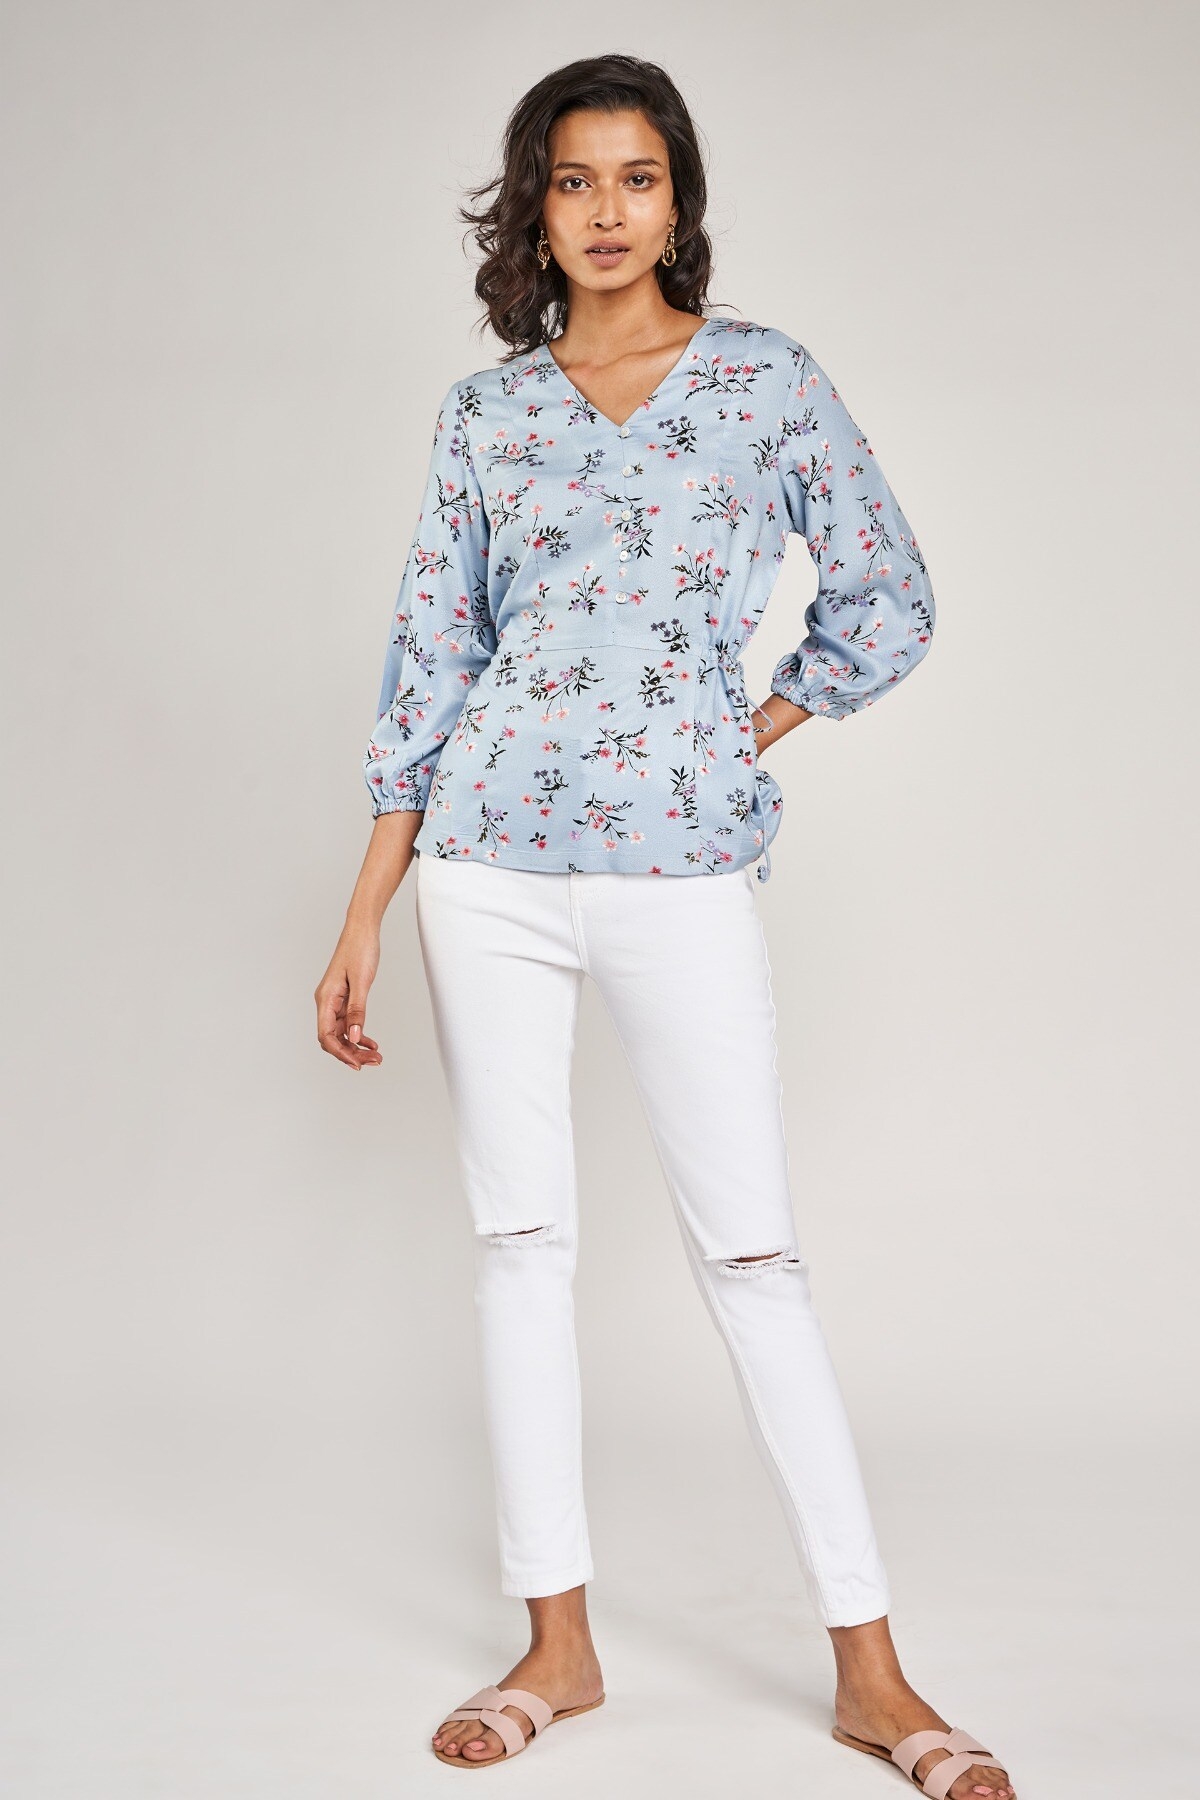 AND | Powder Blue Floral Printed Peplum Top 2